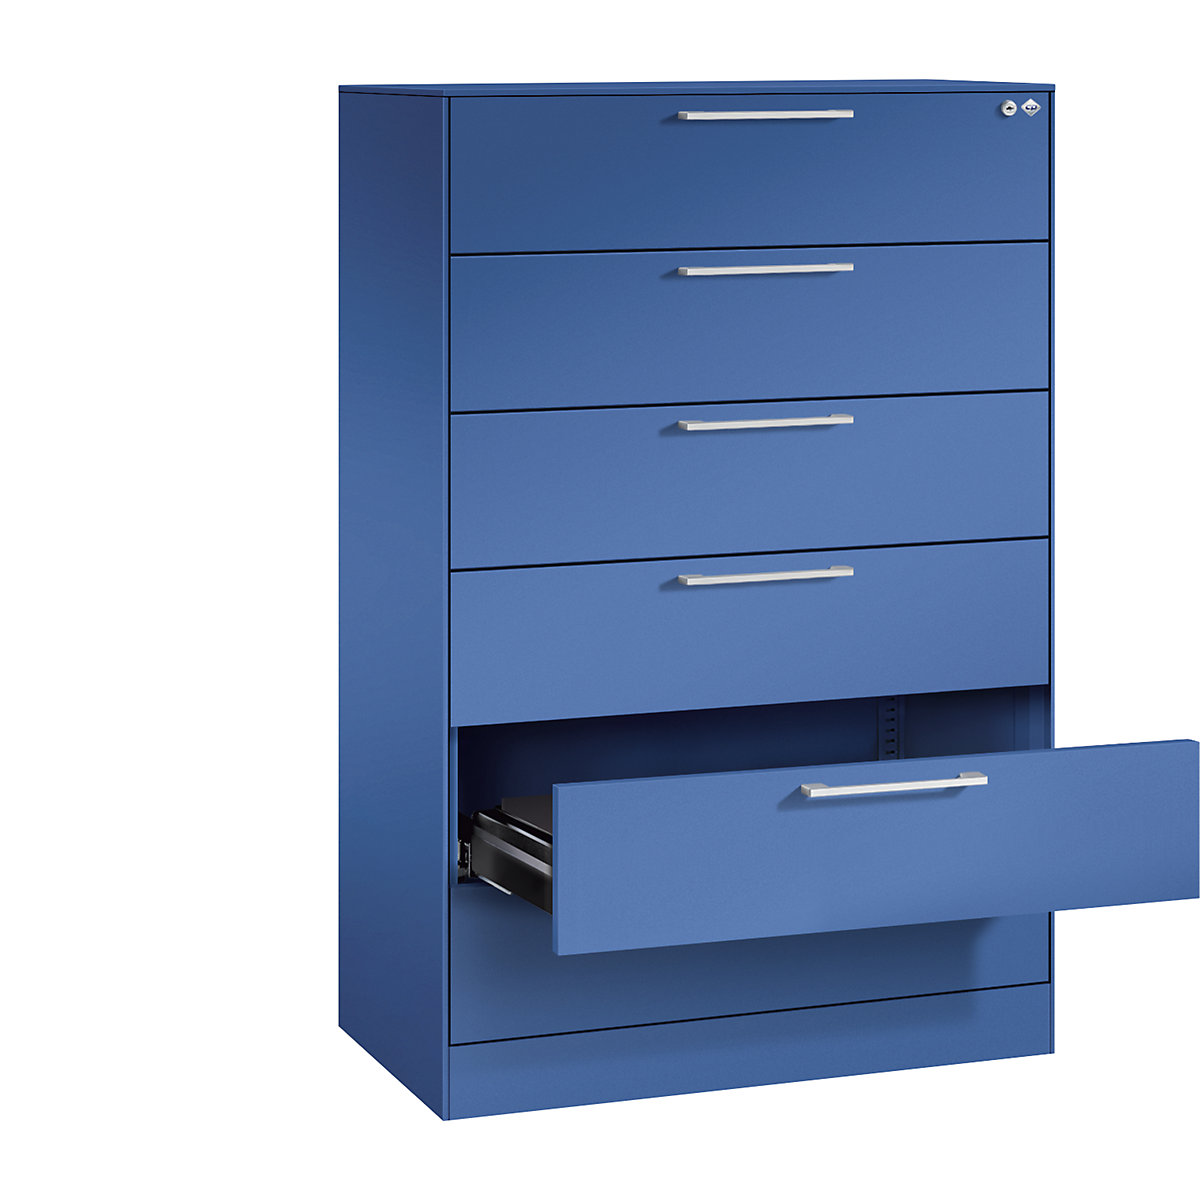 ASISTO card file cabinet – C+P, height 1292 mm, with 6 drawers, A5 landscape, gentian blue/gentian blue-14